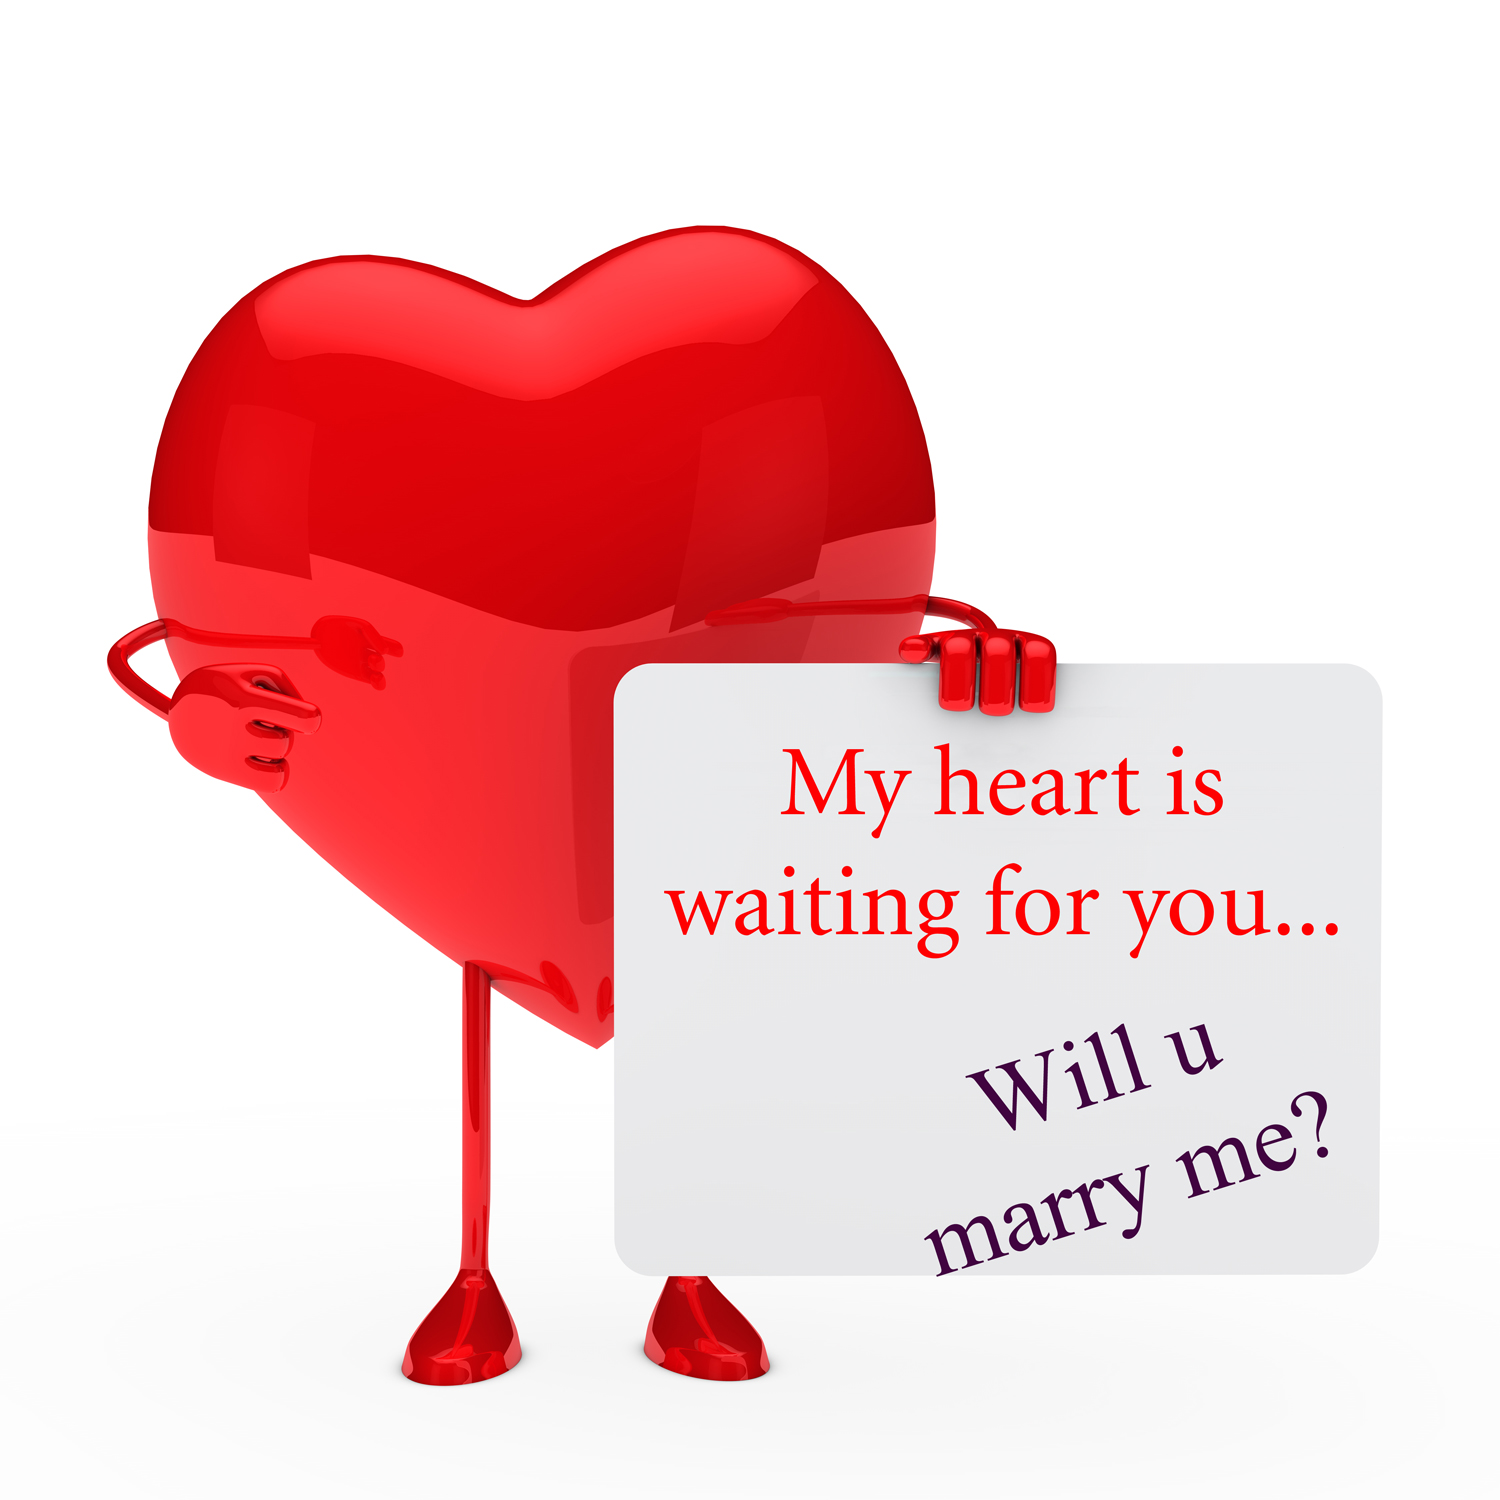 Romantic Proposal “My Heart is waiting for U”